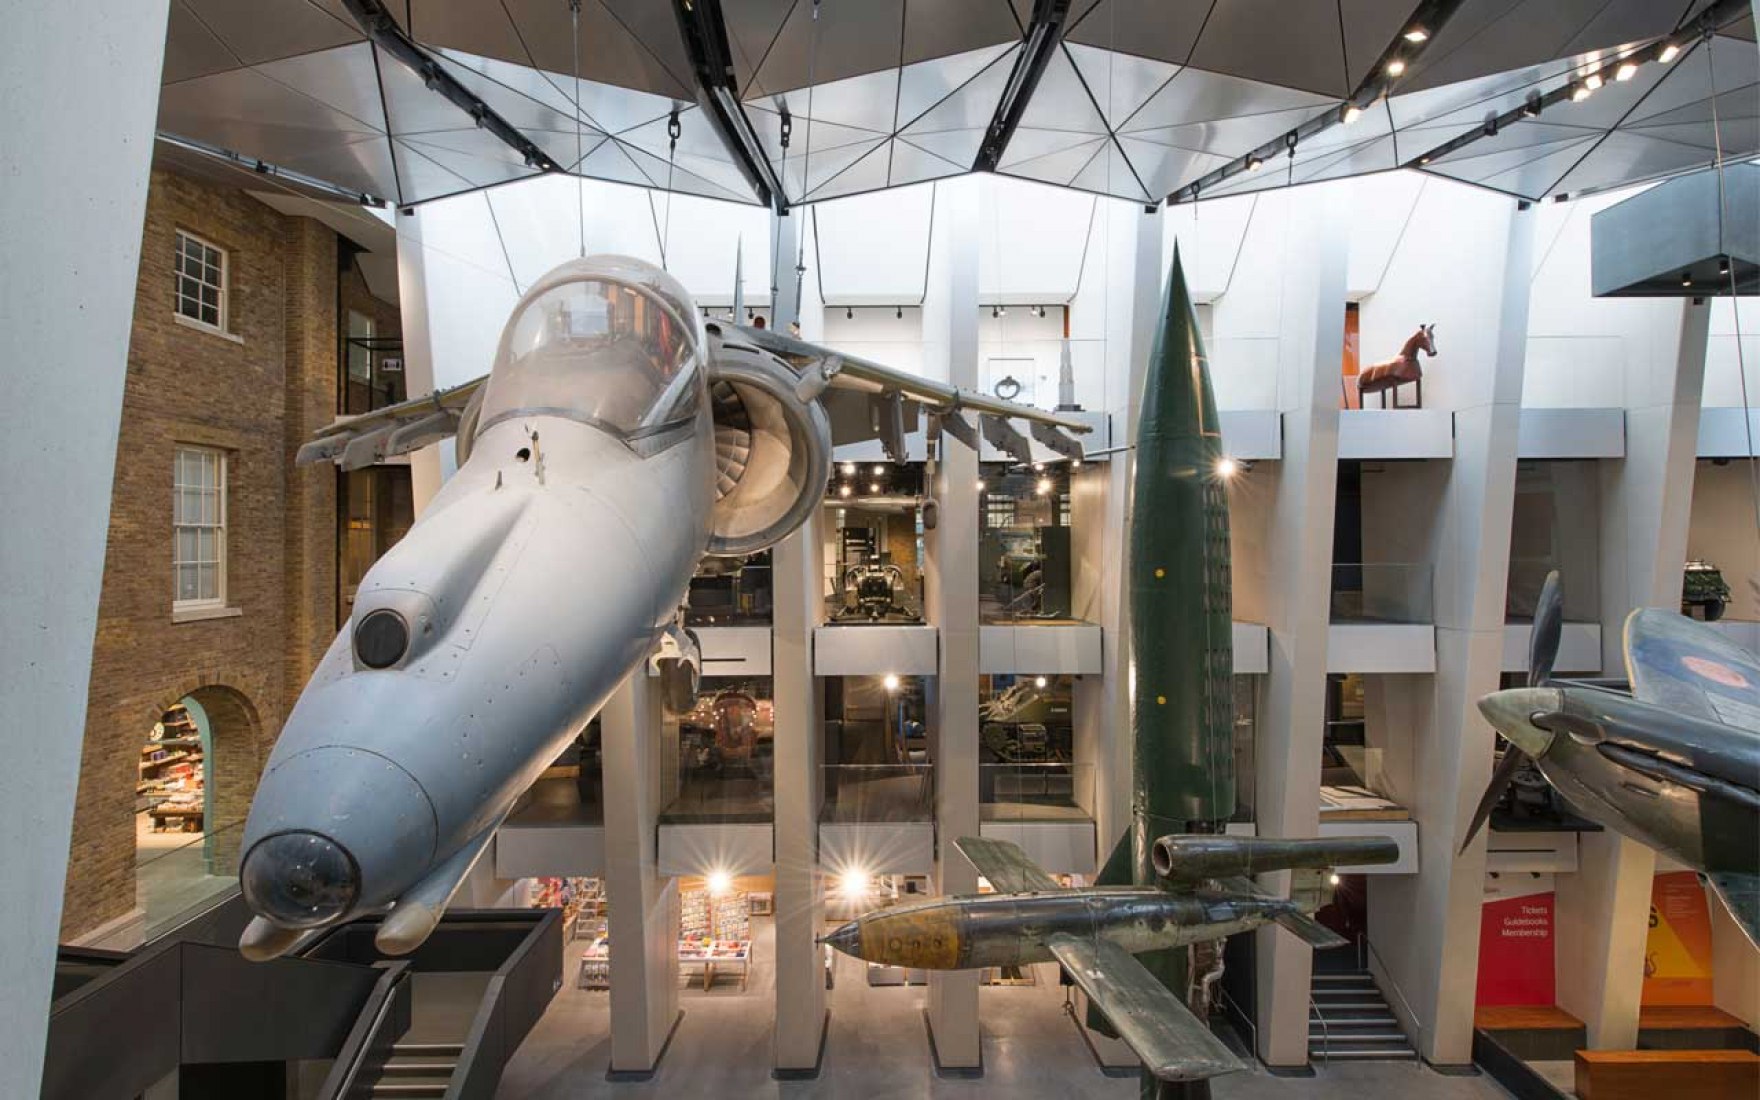 New First World War Galleries at Imperial War Museum. Image courtesy of Foster + Partners.